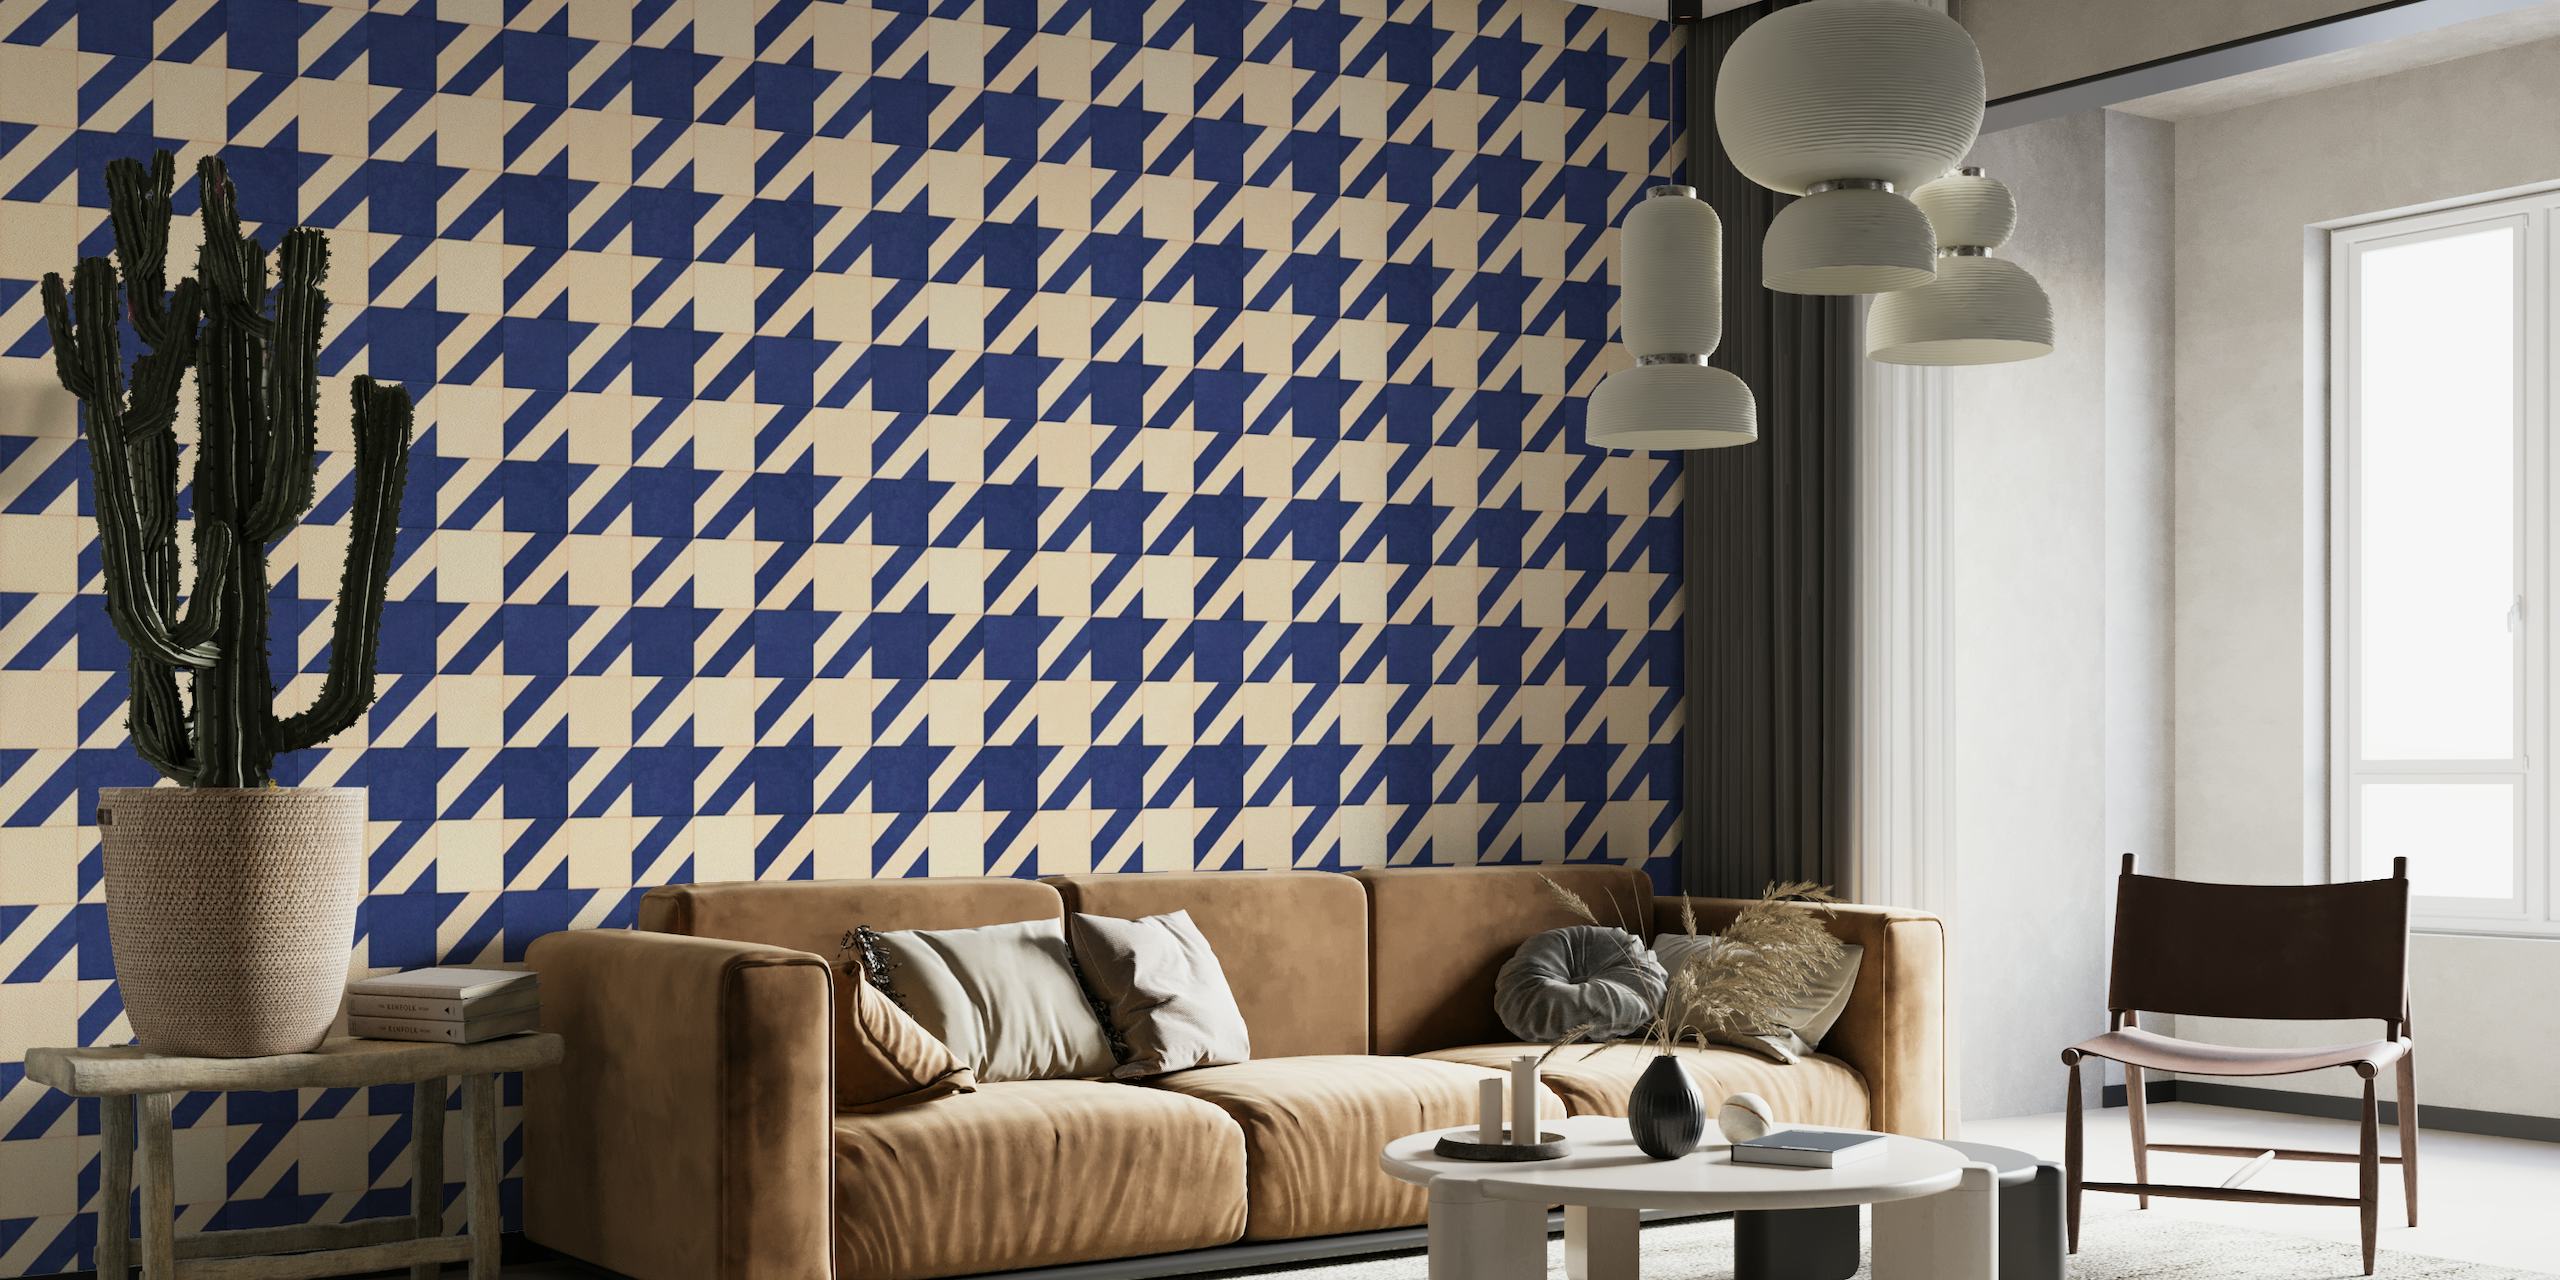 TILES 011 A - Houndstooth tapete